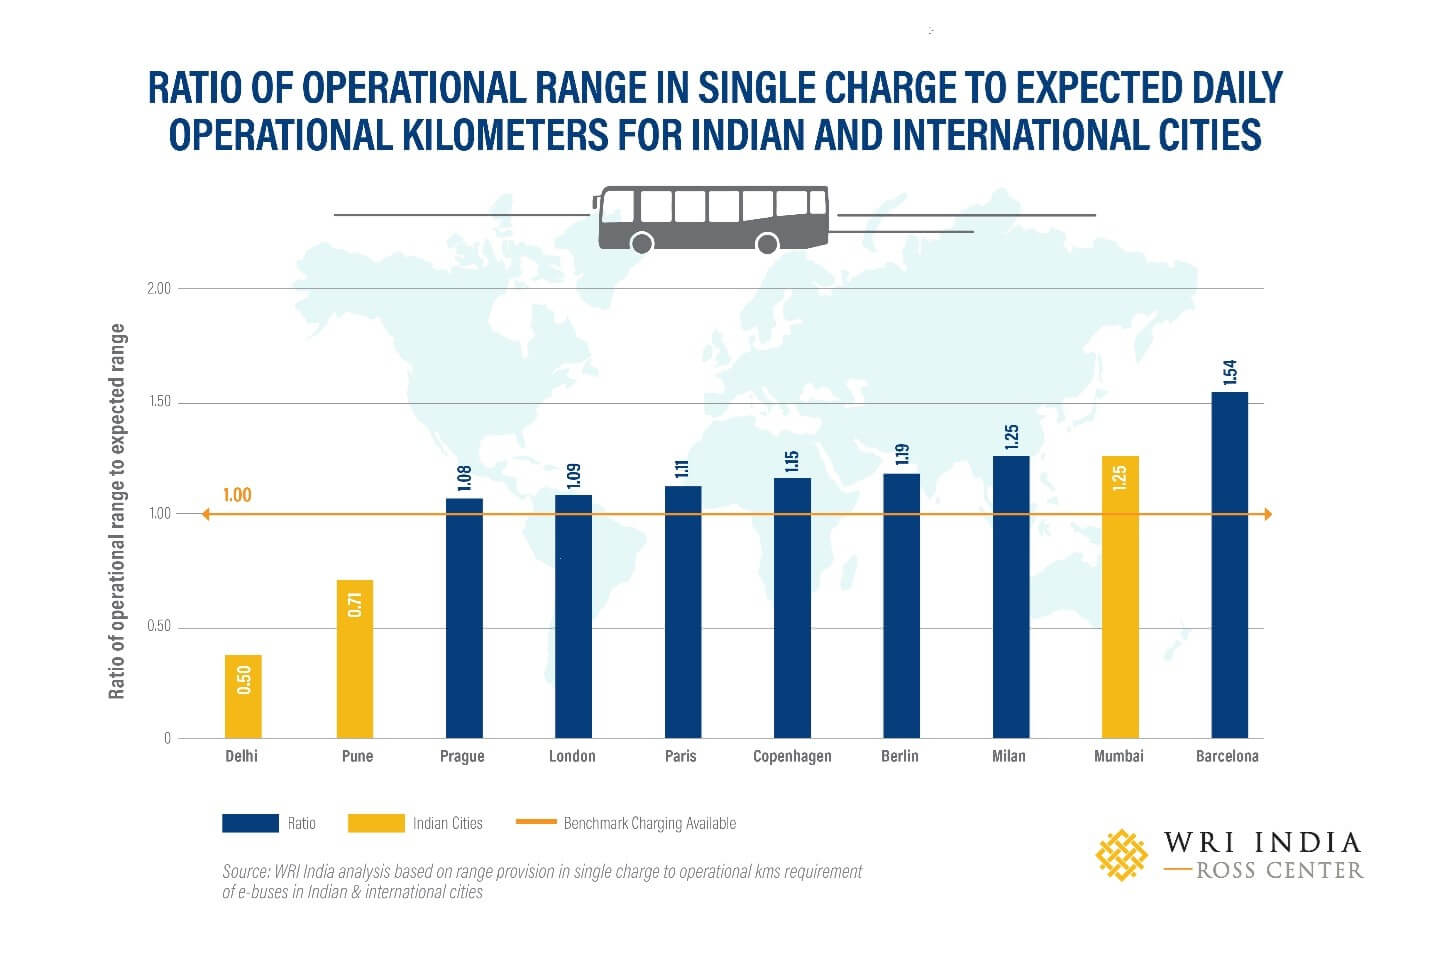 Comparative analysis of ratio of operational range in single charge to expected daily operational kilometers across key Indian and international cities